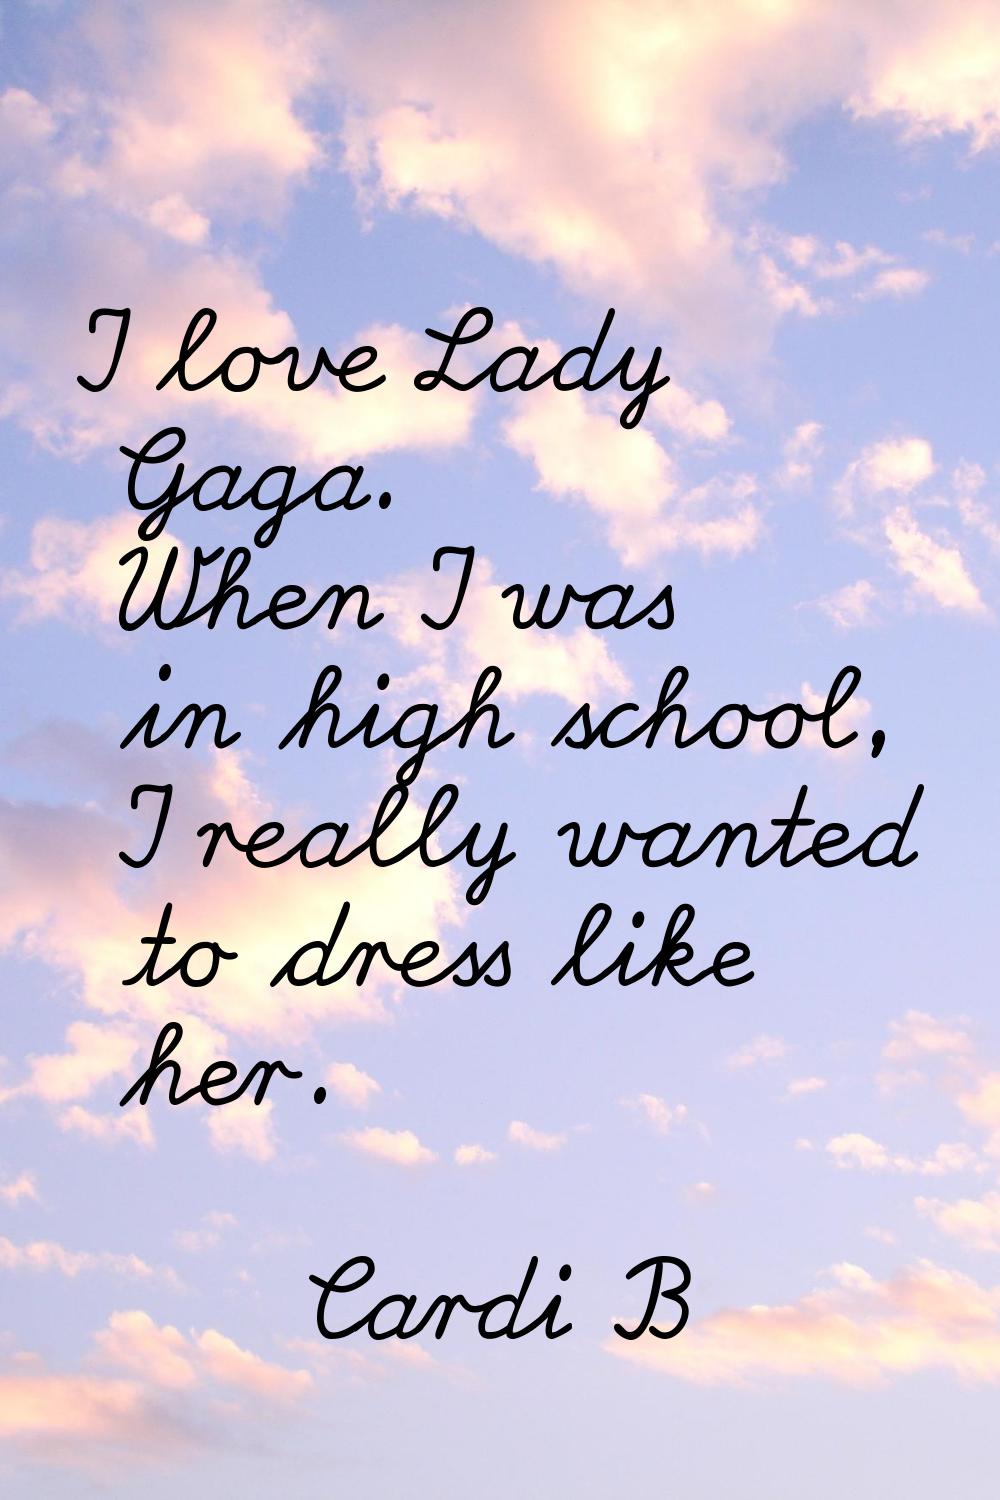 I love Lady Gaga. When I was in high school, I really wanted to dress like her.